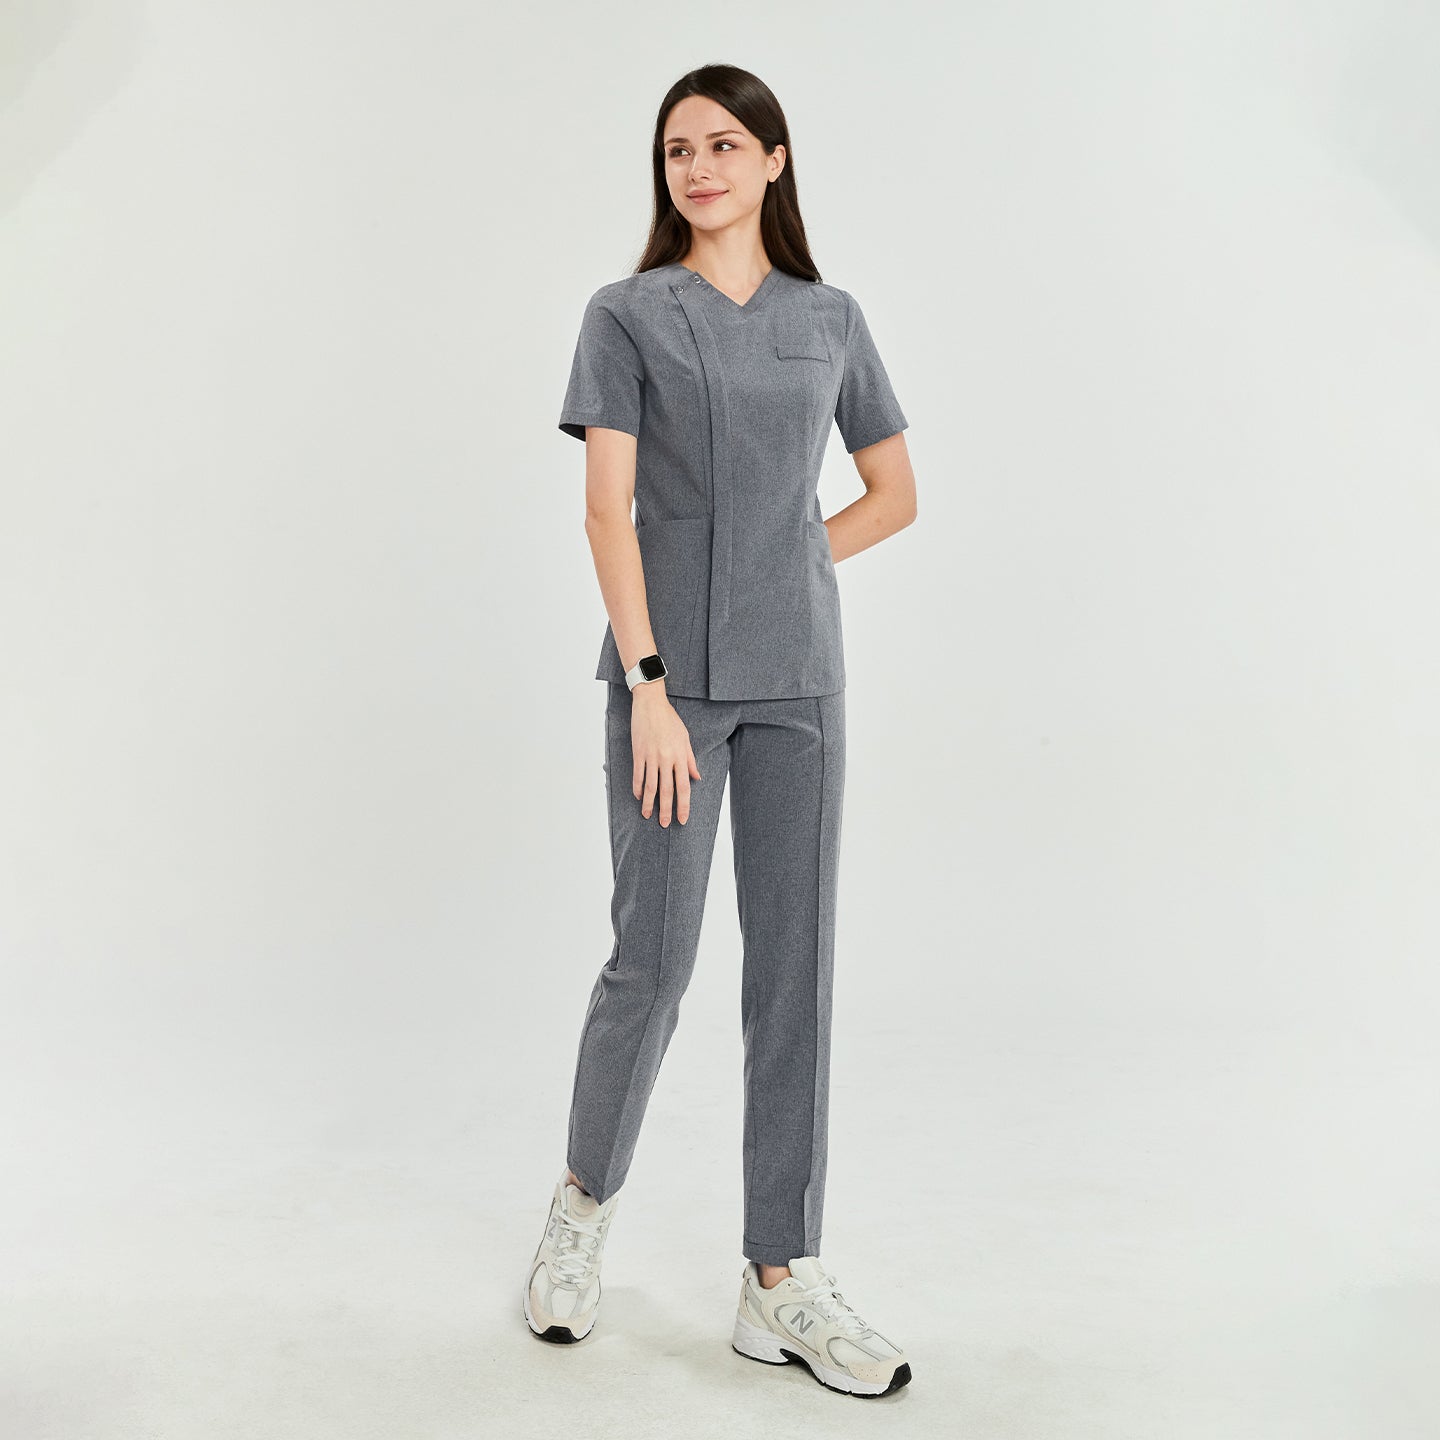 Woman in soft gray Zenir front zipper scrub top with matching pants, standing side view. Professional and comfortable fit,Soft Gray